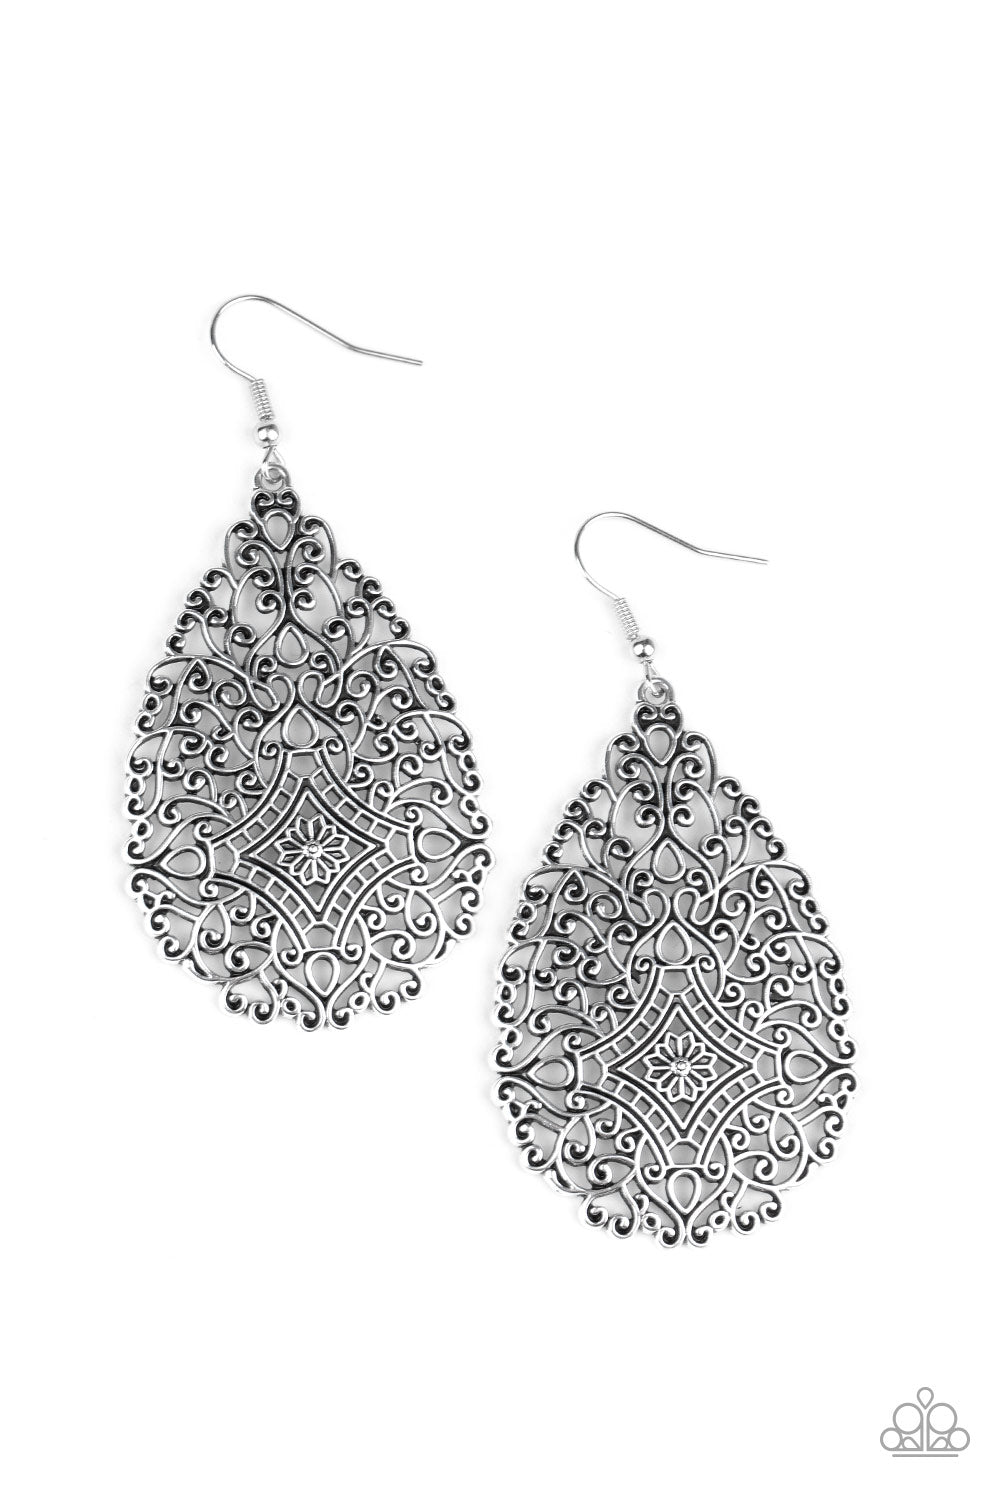 &lt;P&gt;Brushed in an antiqued finish, burnished silver filigree climbs into a floral teardrop frame for a whimsically vintage look. Earring attaches to a standard fishhook fitting.&lt;/P&gt;  

&lt;P&gt; &lt;I&gt;  Sold as one pair of earrings. &lt;/I&gt;  &lt;/P&gt;


&lt;img src=\&quot;https://d9b54x484lq62.cloudfront.net/paparazzi/shopping/images/517_tag150x115_1.png\&quot; alt=\&quot;New Kit\&quot; align=\&quot;middle\&quot; height=\&quot;50\&quot; width=\&quot;50\&quot;/&gt;